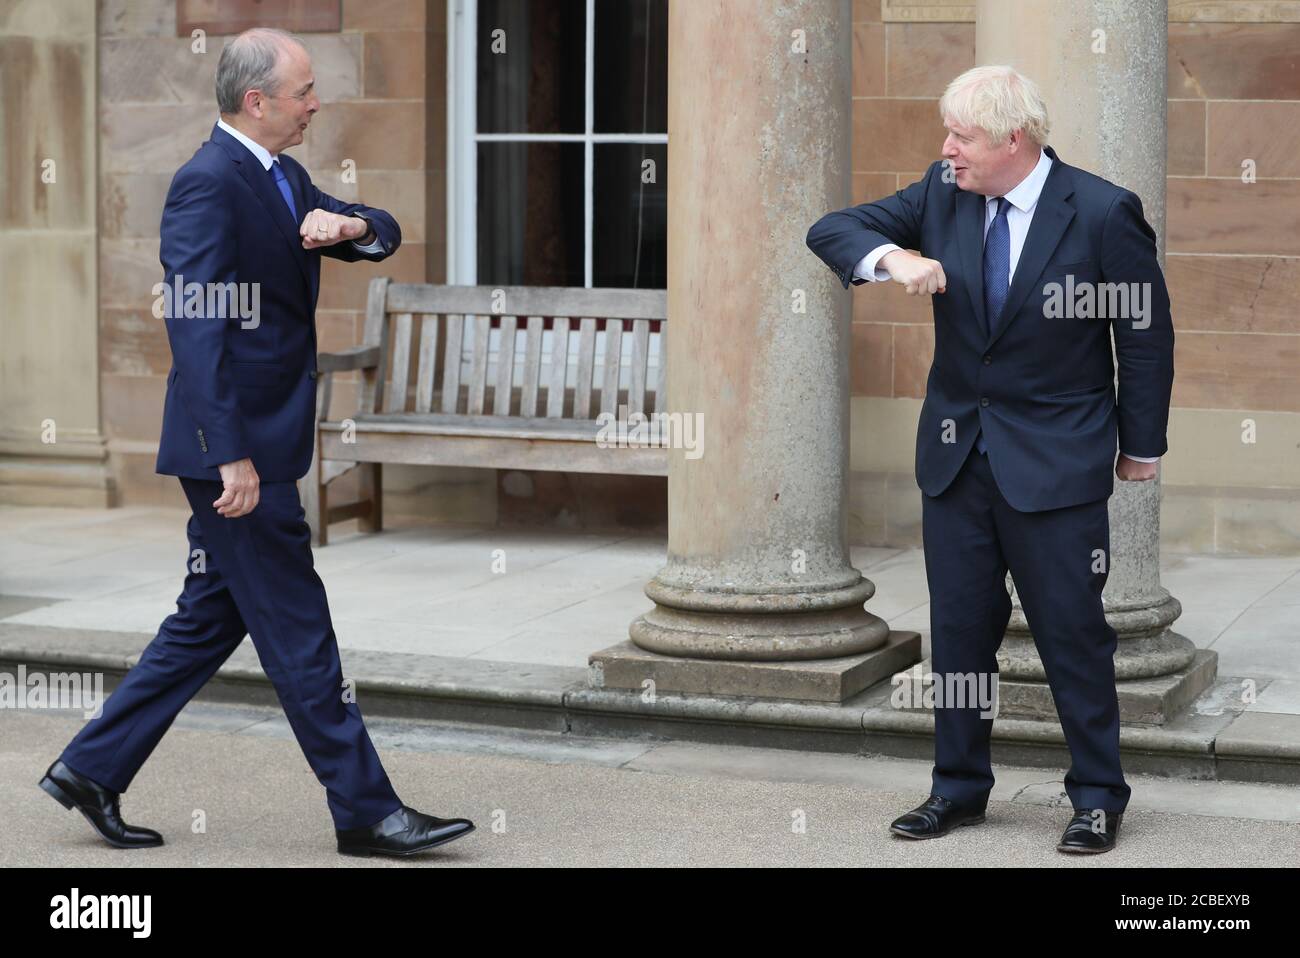 Prime Minister Boris Johnson (right) and Taoiseach Micheal Martin greet each other with an elbow bump at Hillsborough Castle during the Prime Minister's visit to Belfast. Stock Photo